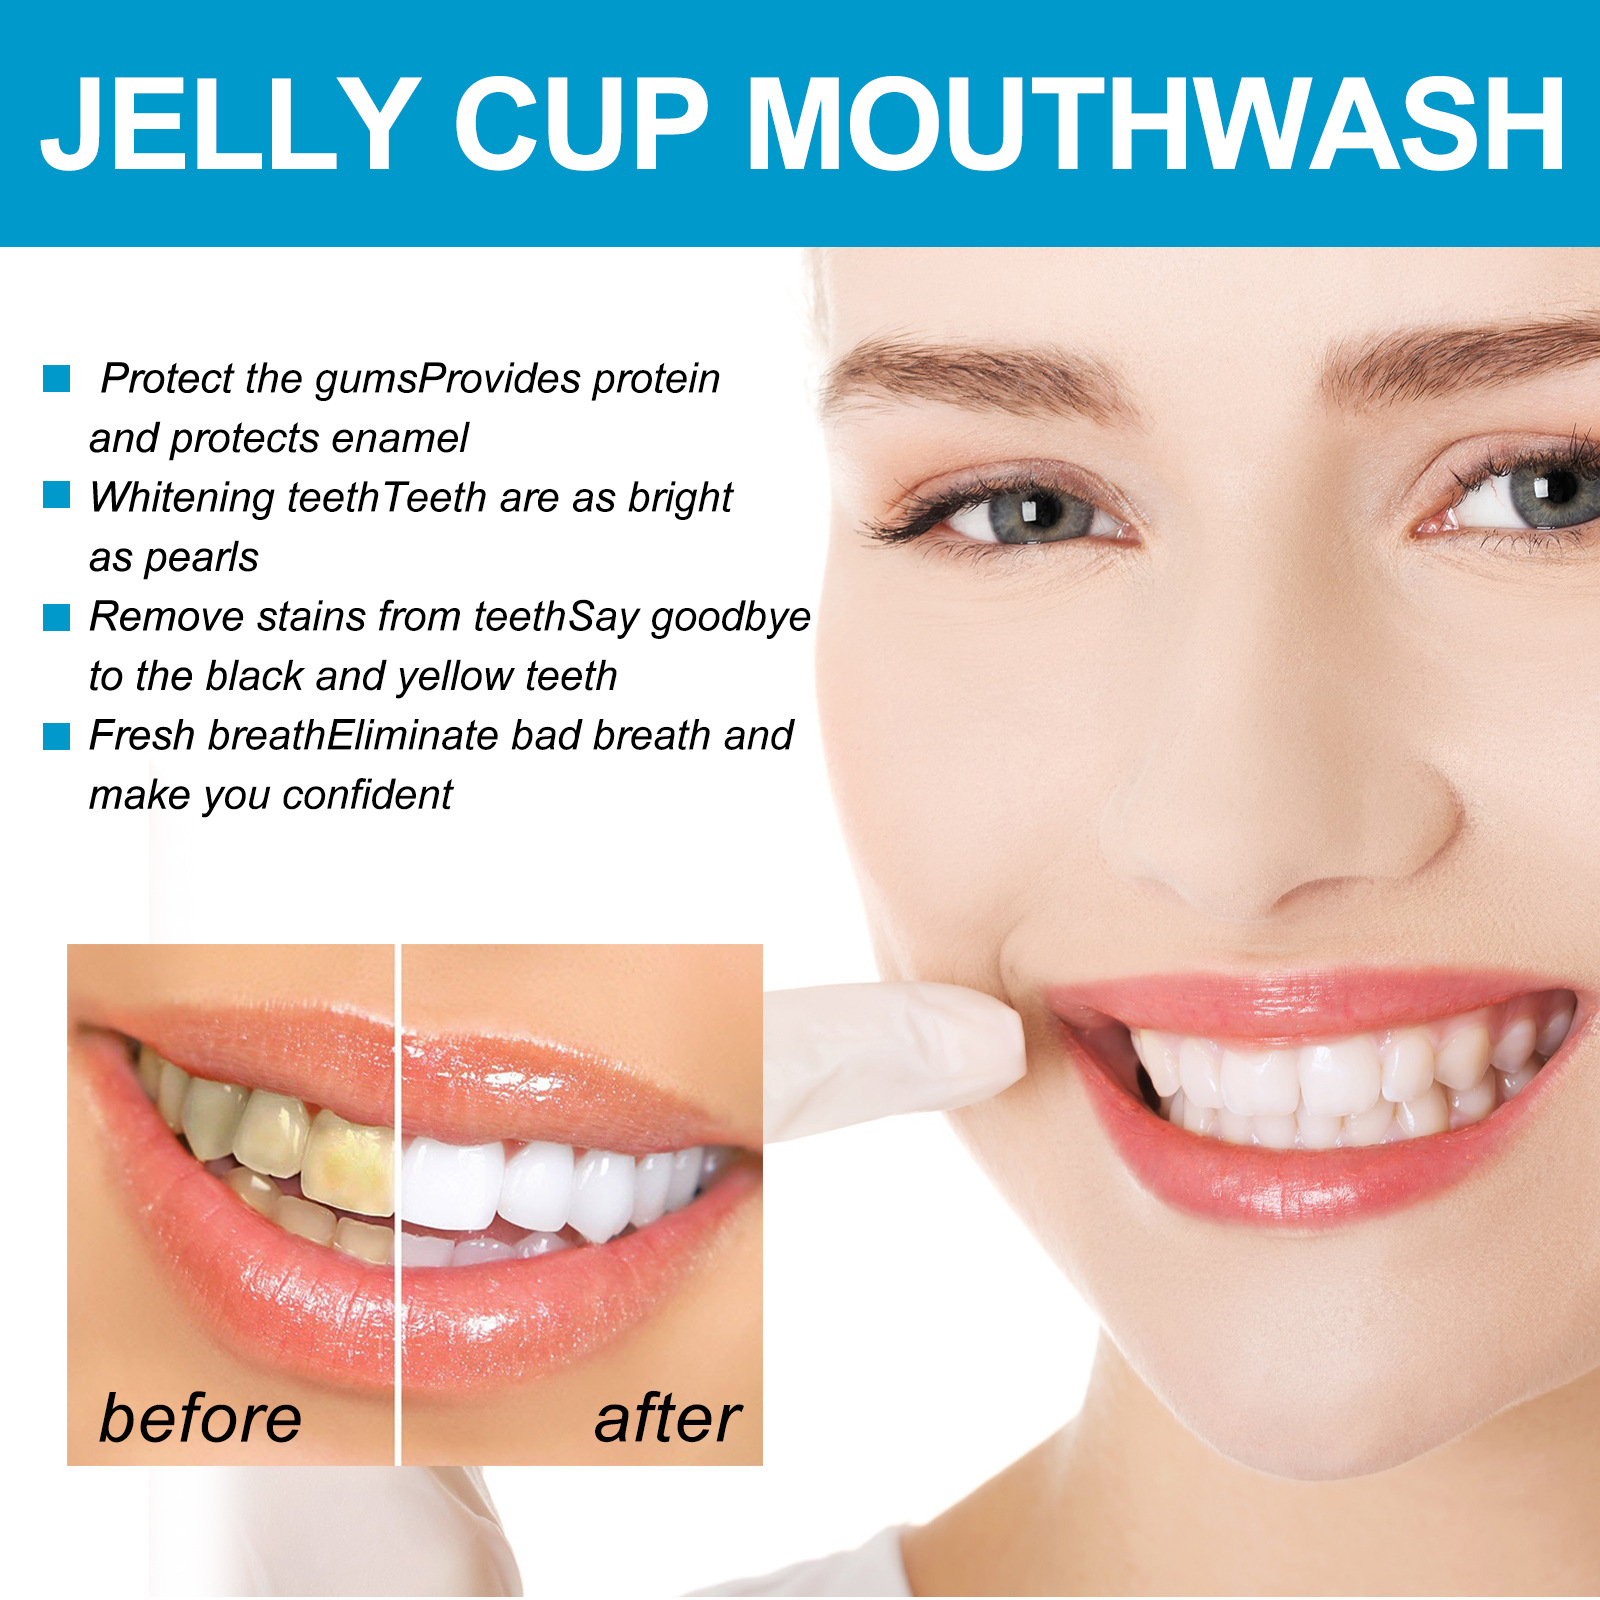 Eelhoe Jelly Cup Mouthwash Clean Oral Odor Tooth Stains Smoke Stains Bright White Teeth Care Fresh Breath